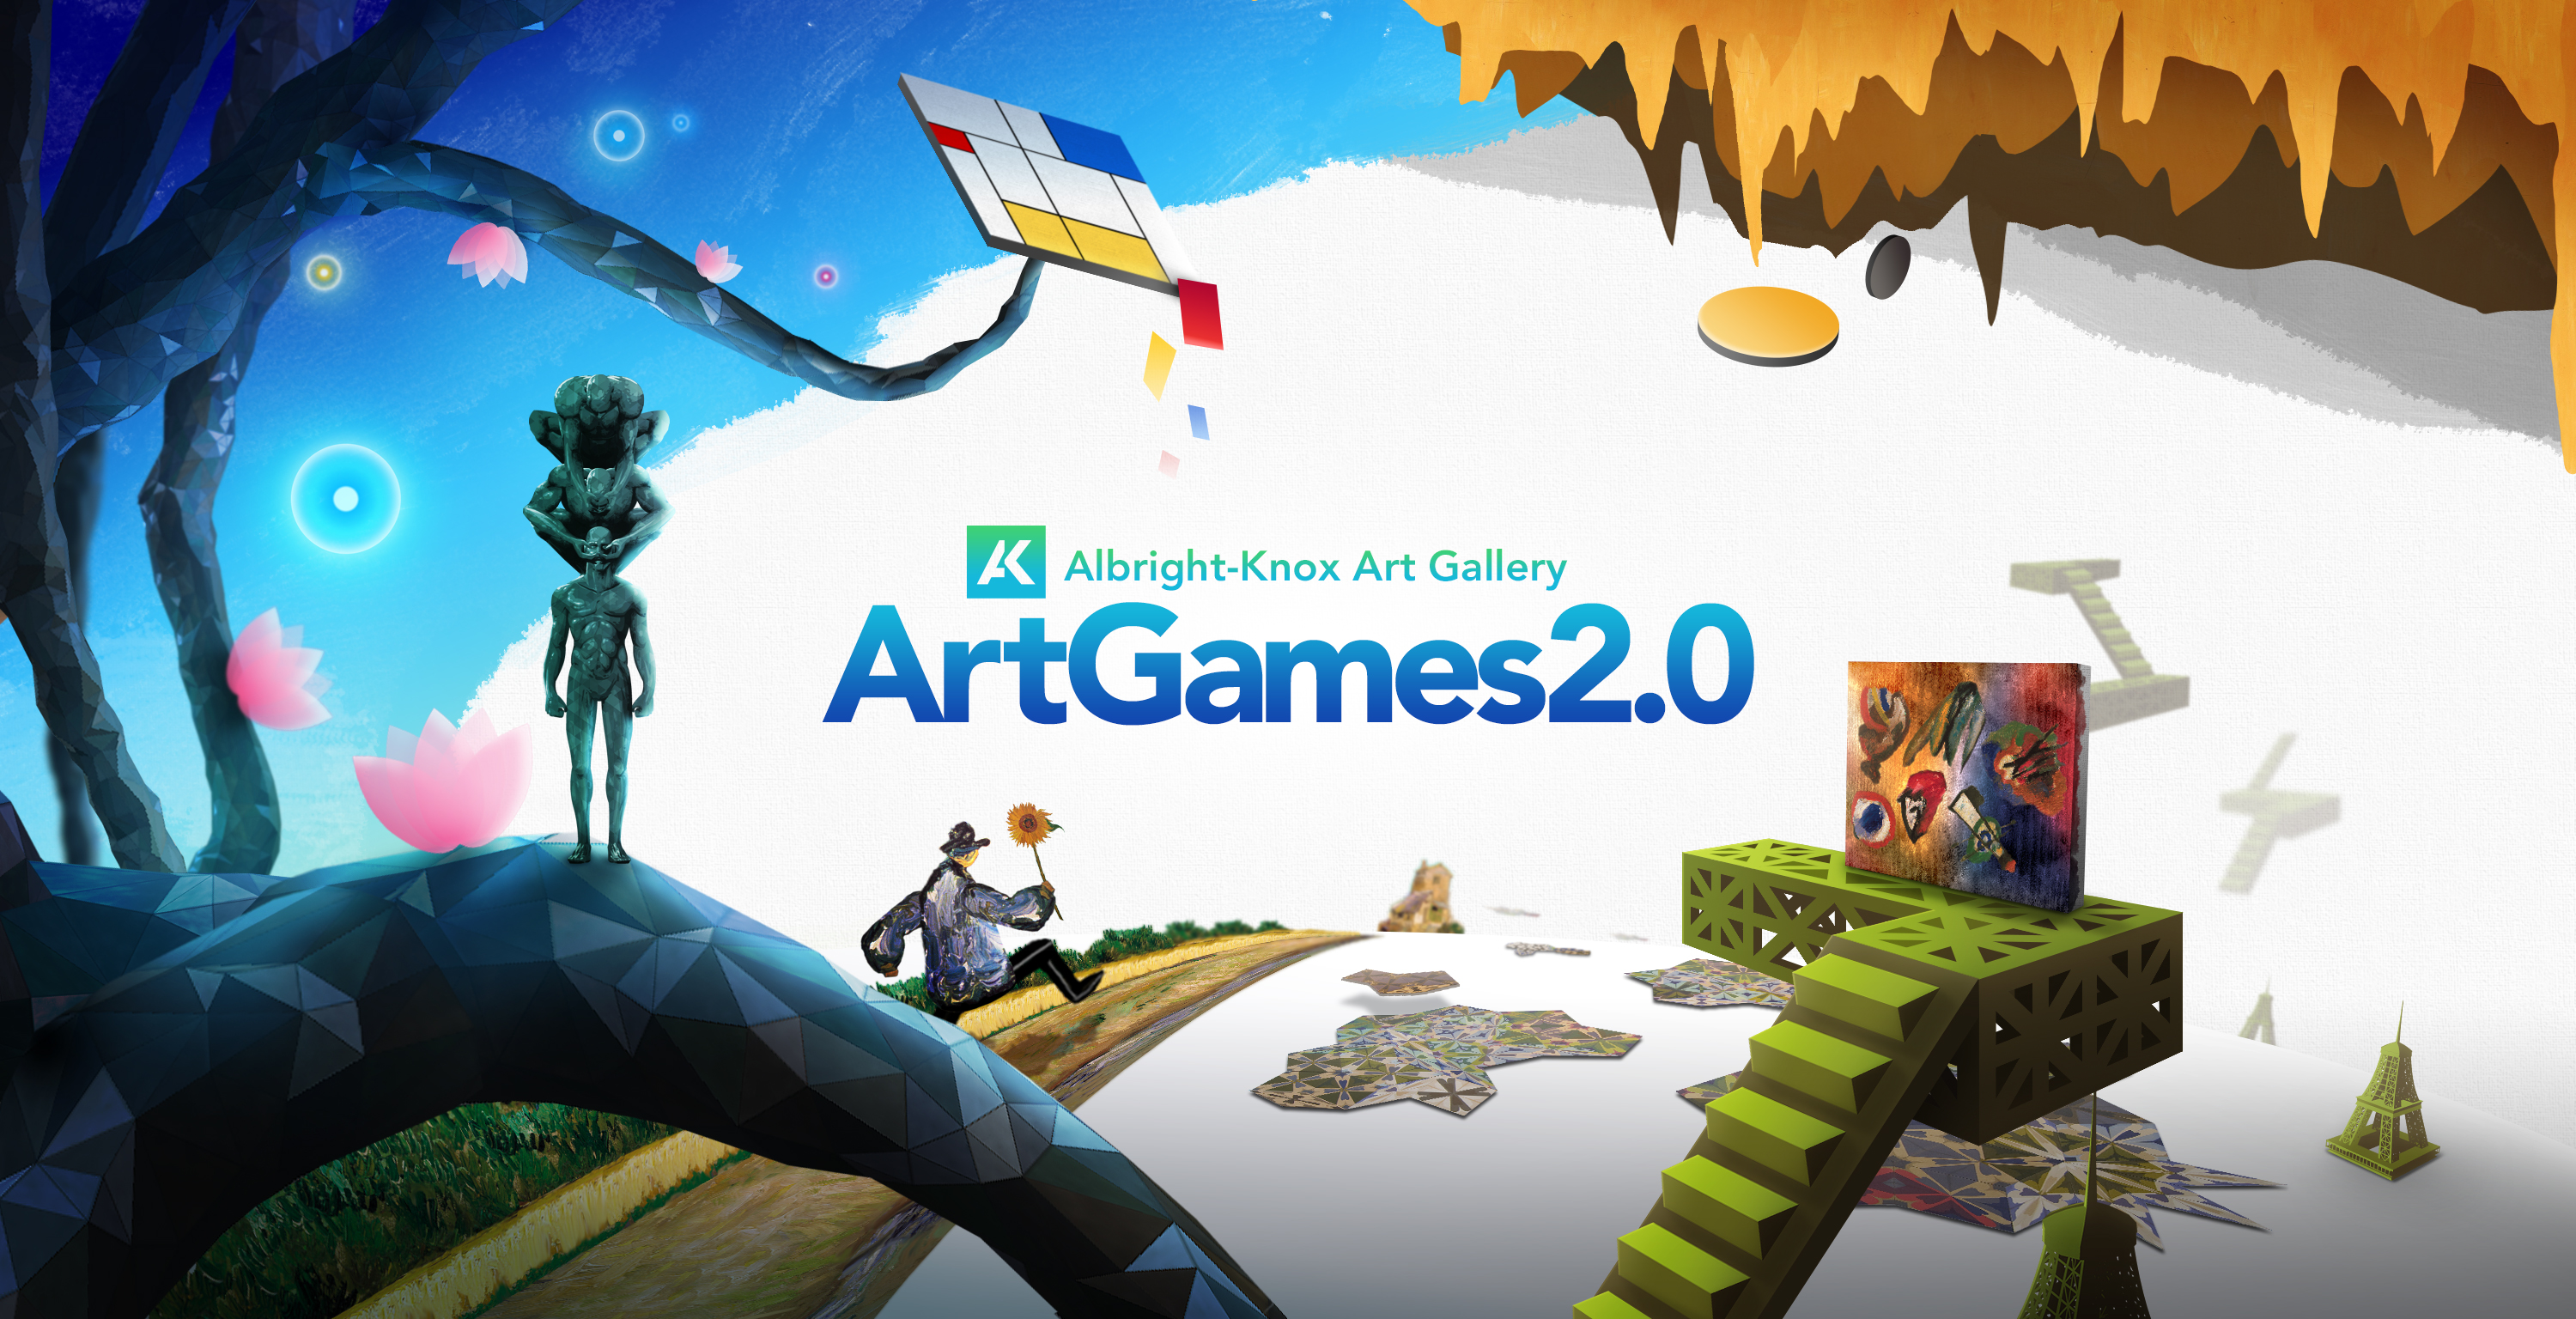 ArtGames 2.0 promotional graphic with visual elements from all seven games